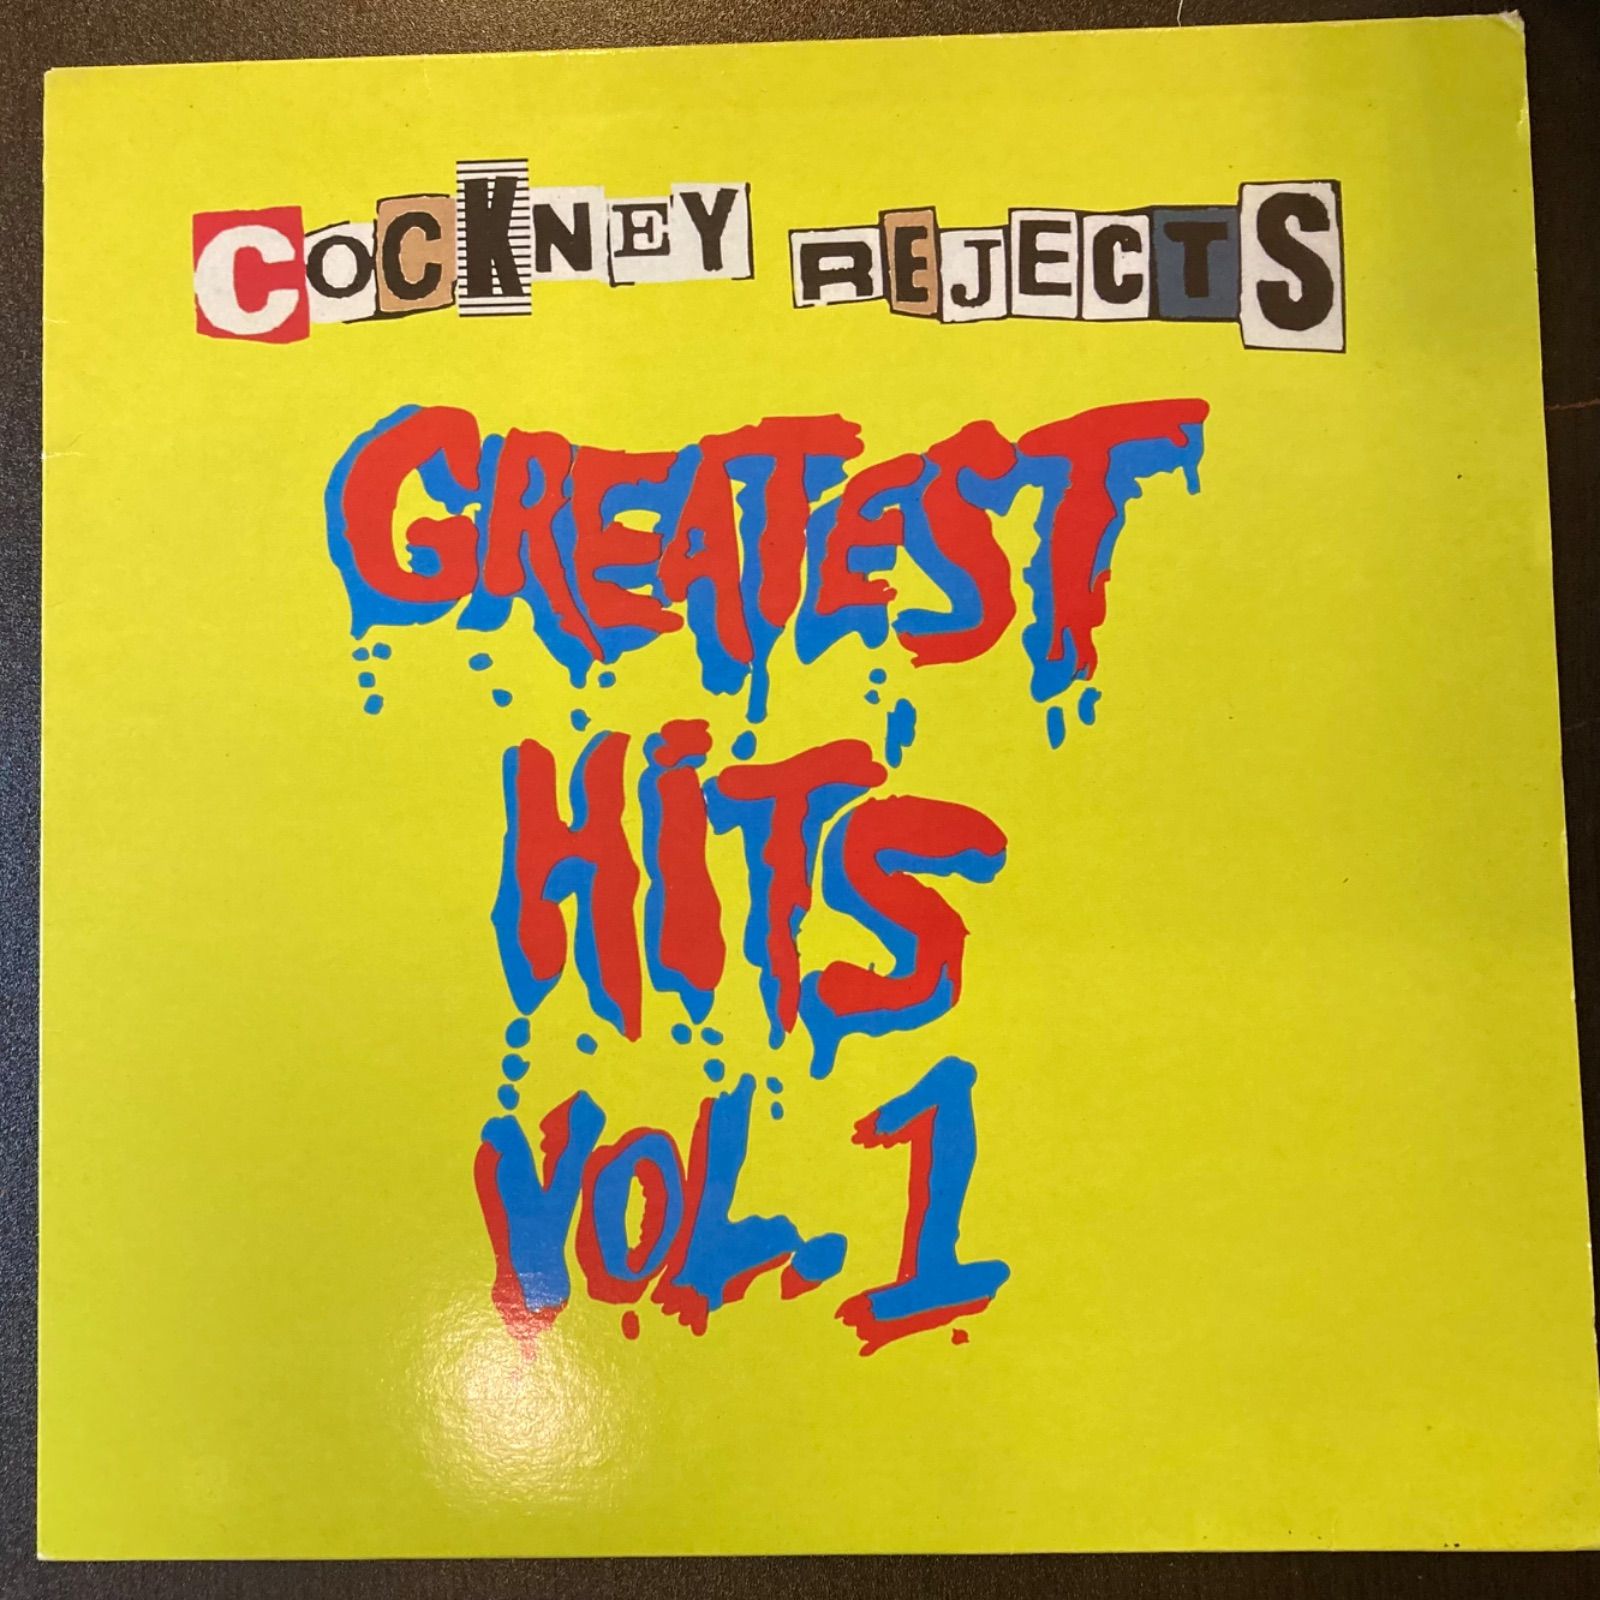 COCKNEY REJECTS コックニー・リジェクツ『Greatest Hits Vol.1』(USED 